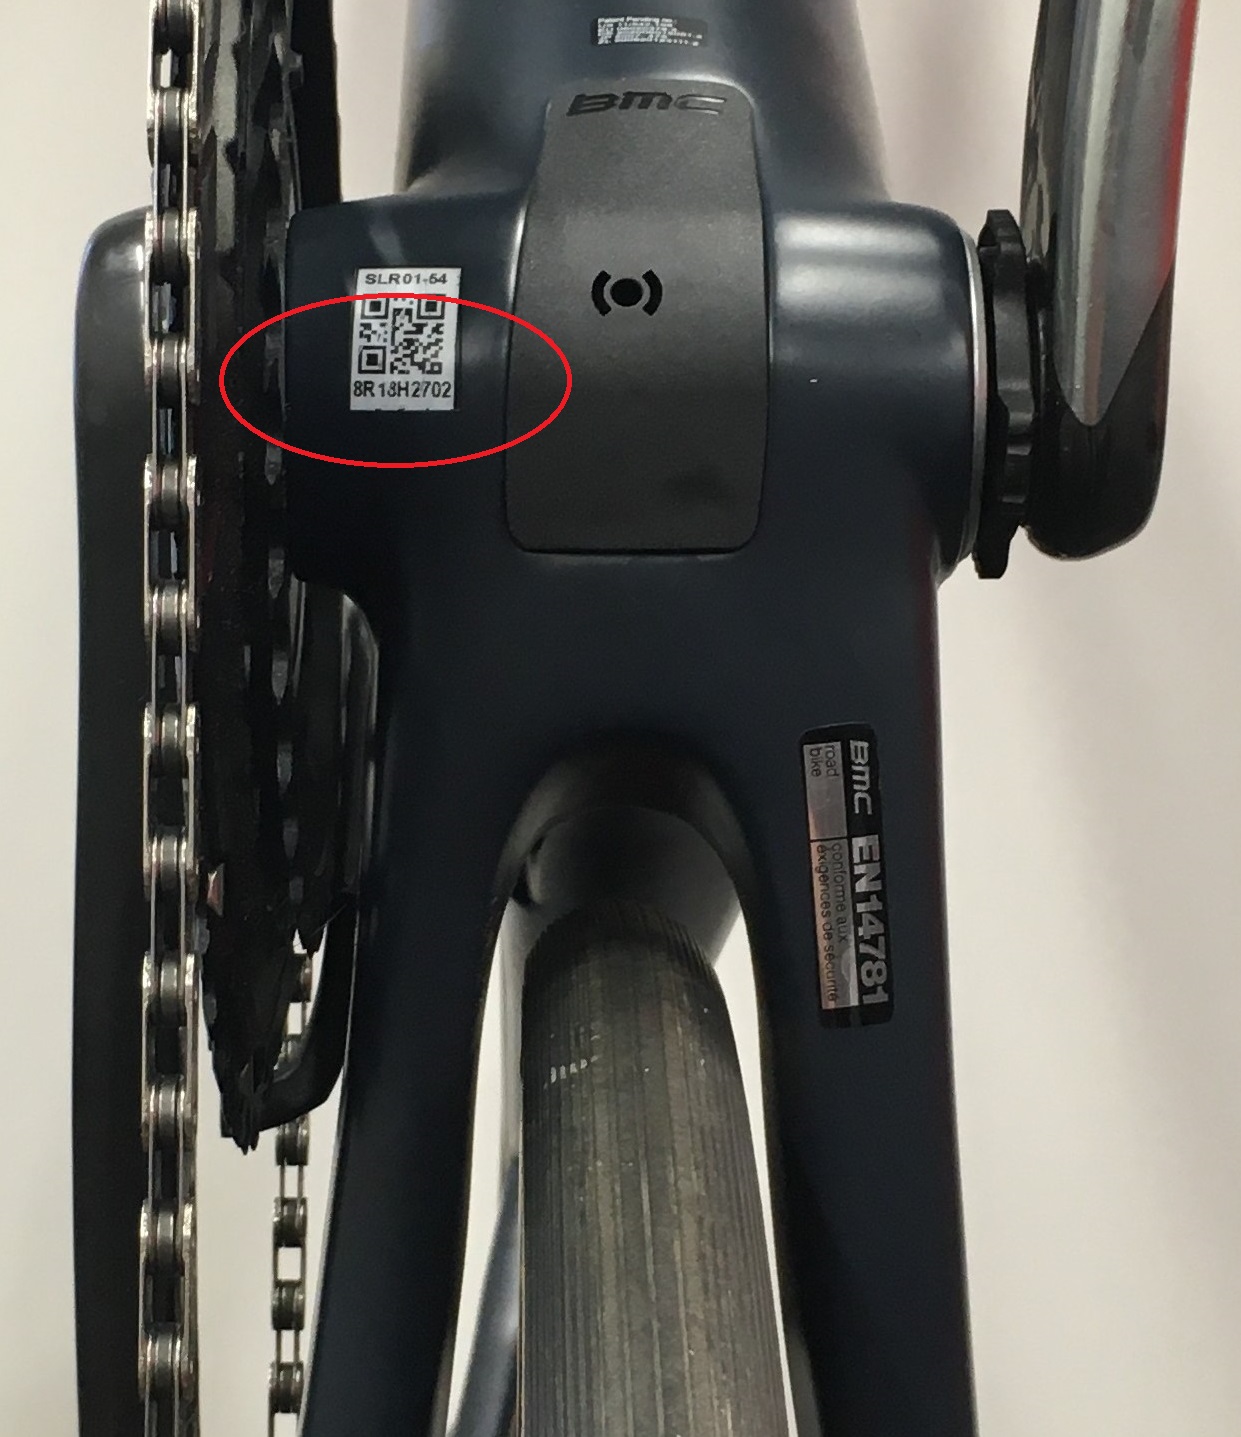 BMC Teammachine SLR01 fork recall model and serial number location example